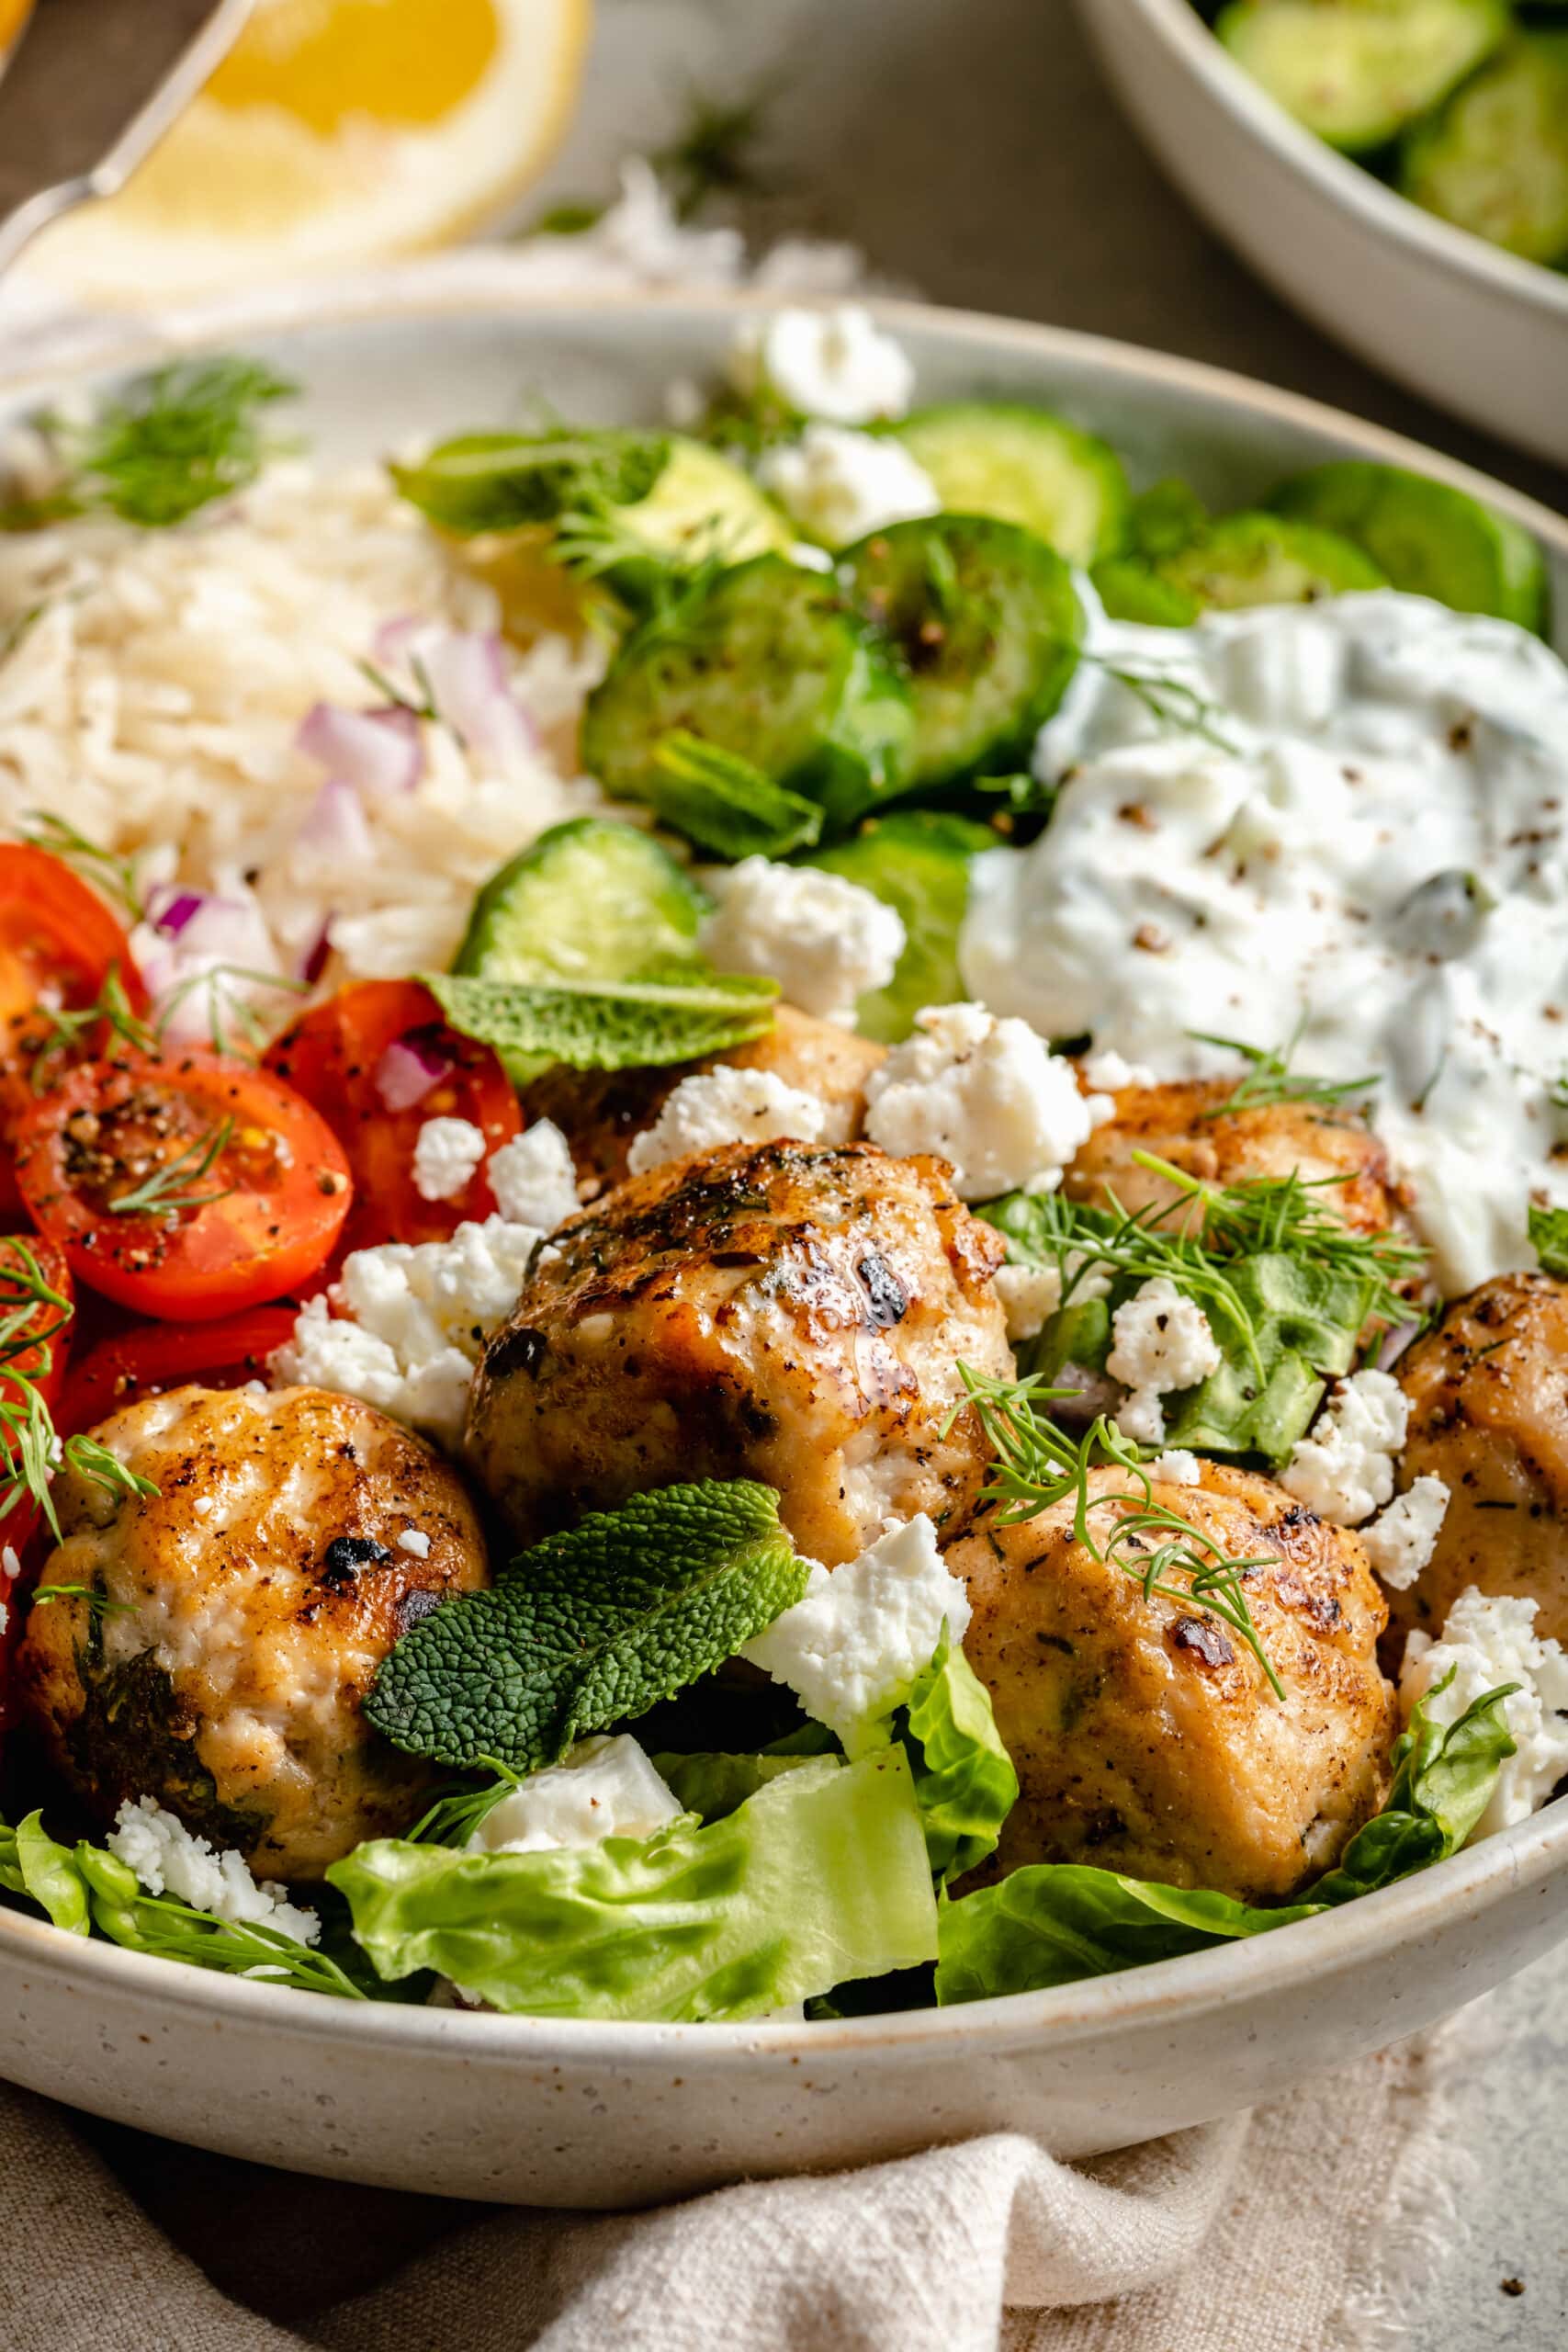 https://allthehealthythings.com/wp-content/uploads/2022/05/Greek-Chicken-Meatball-Bowls-6-scaled.jpg